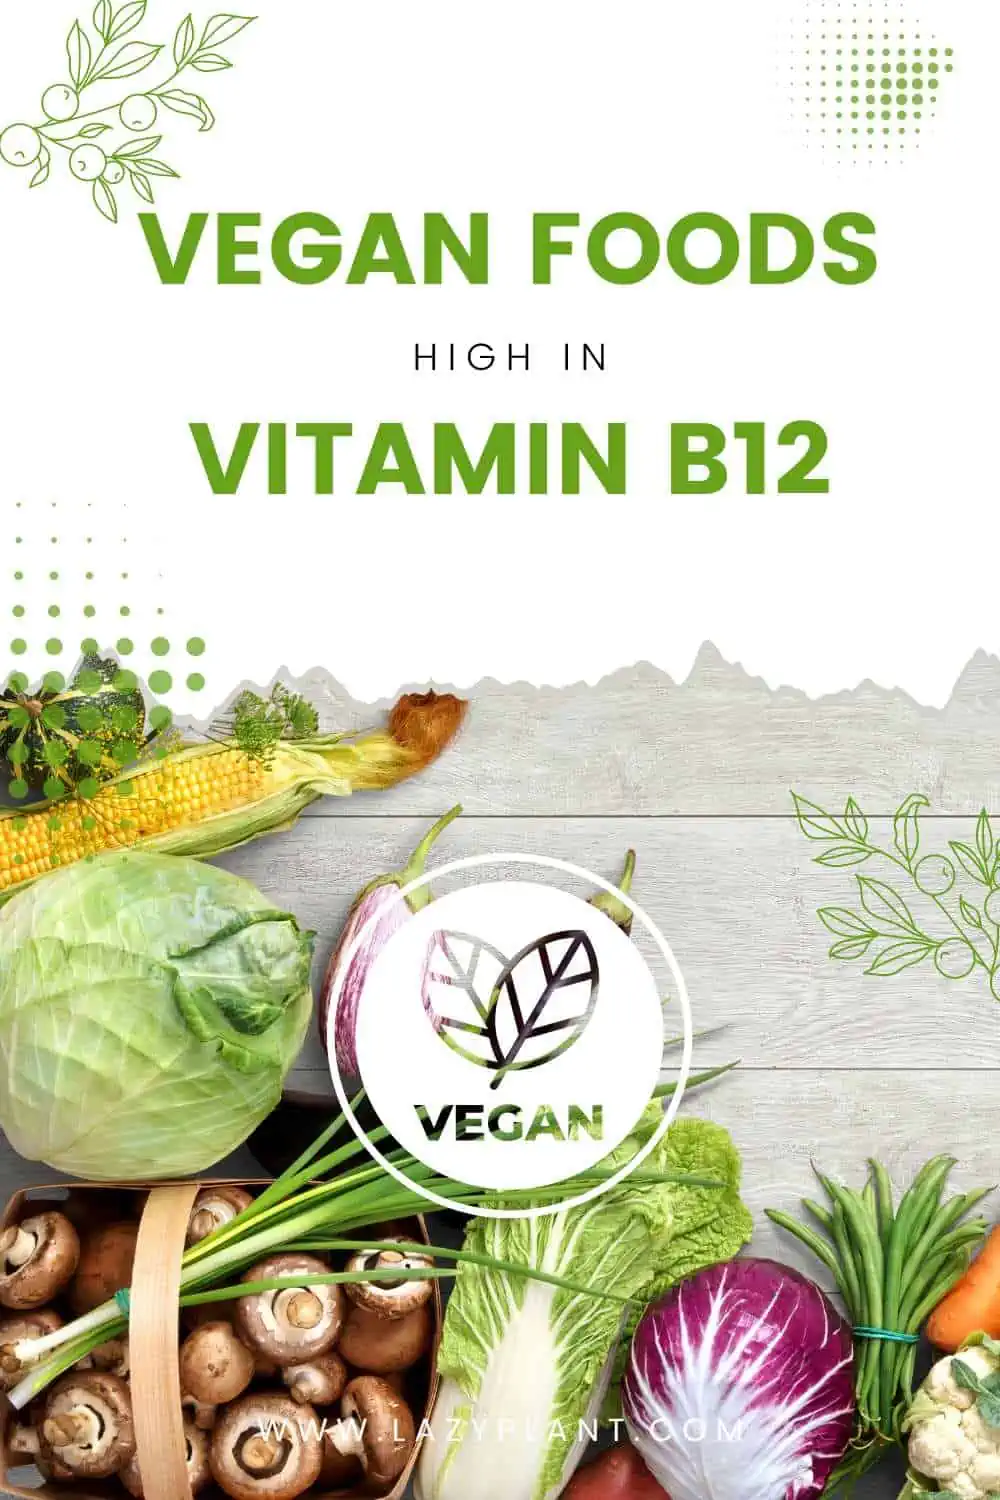 There are only a few vegan foods with vitamin B12.